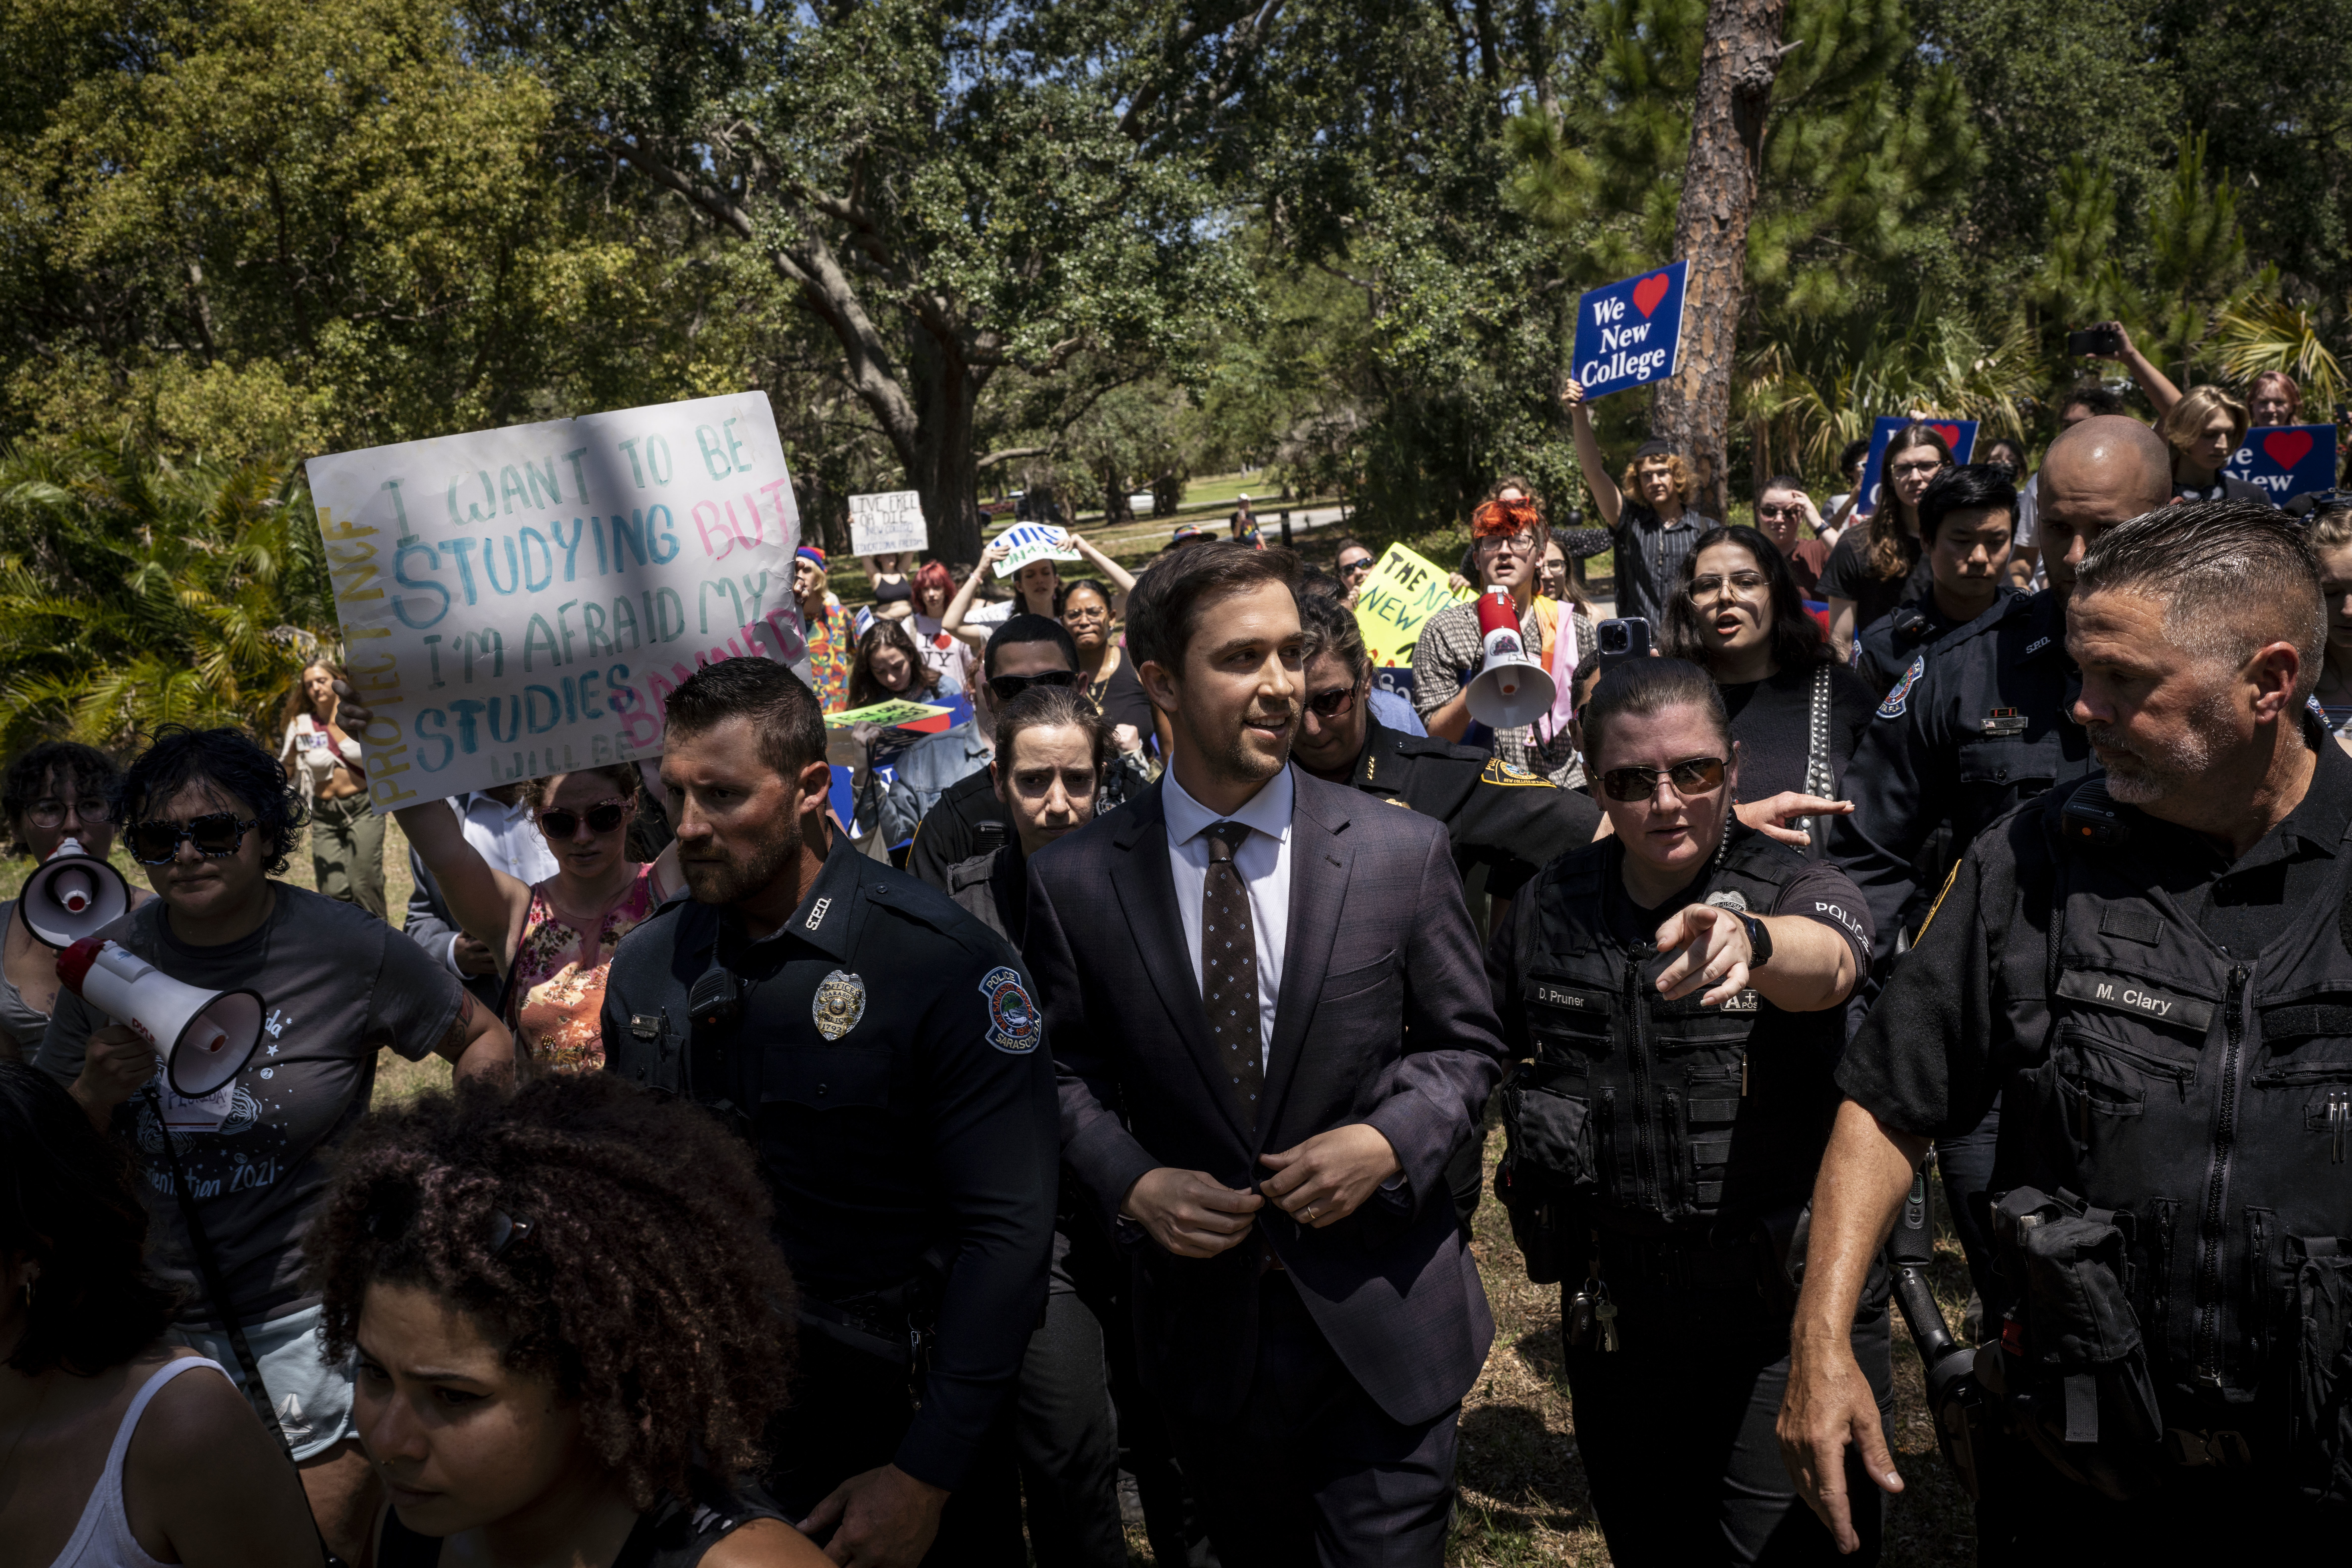 Christopher Rufo, a right wing activist and New College of Florida trustee, walks through protestors on his way out of a bill signing event featuring Florida Governor Ron DeSantis, who signed three education bills on the campus of New College of Florida in Sarasota, Florida, on Monday, May 15, 2023.